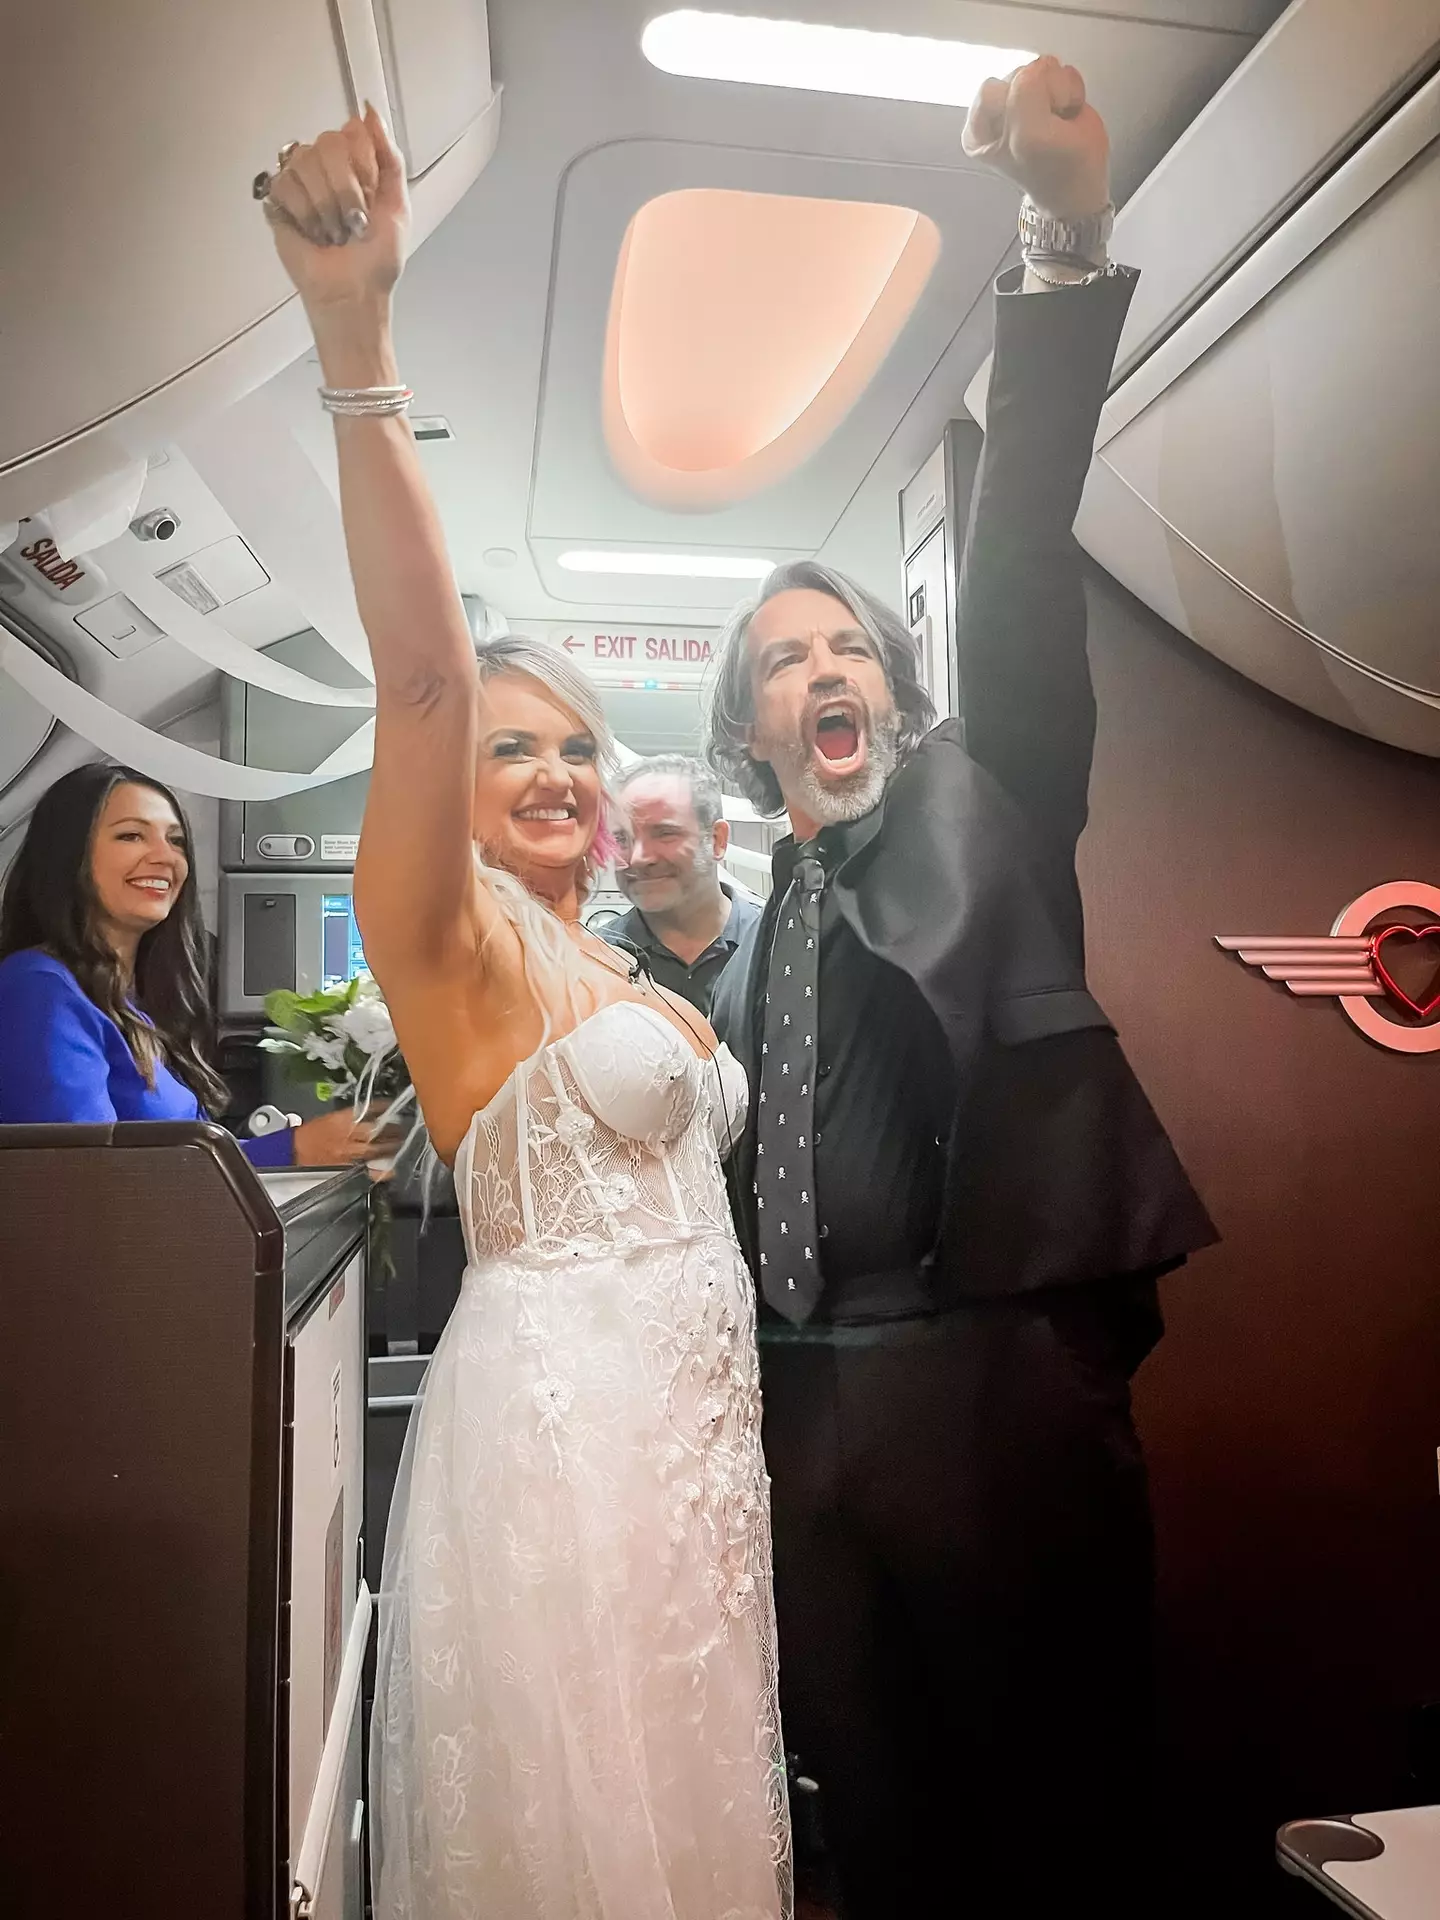 A professional photographer on board pulled out all the stops in proving the happy couple with official wedding photos (Southwest Airlines Facebook).